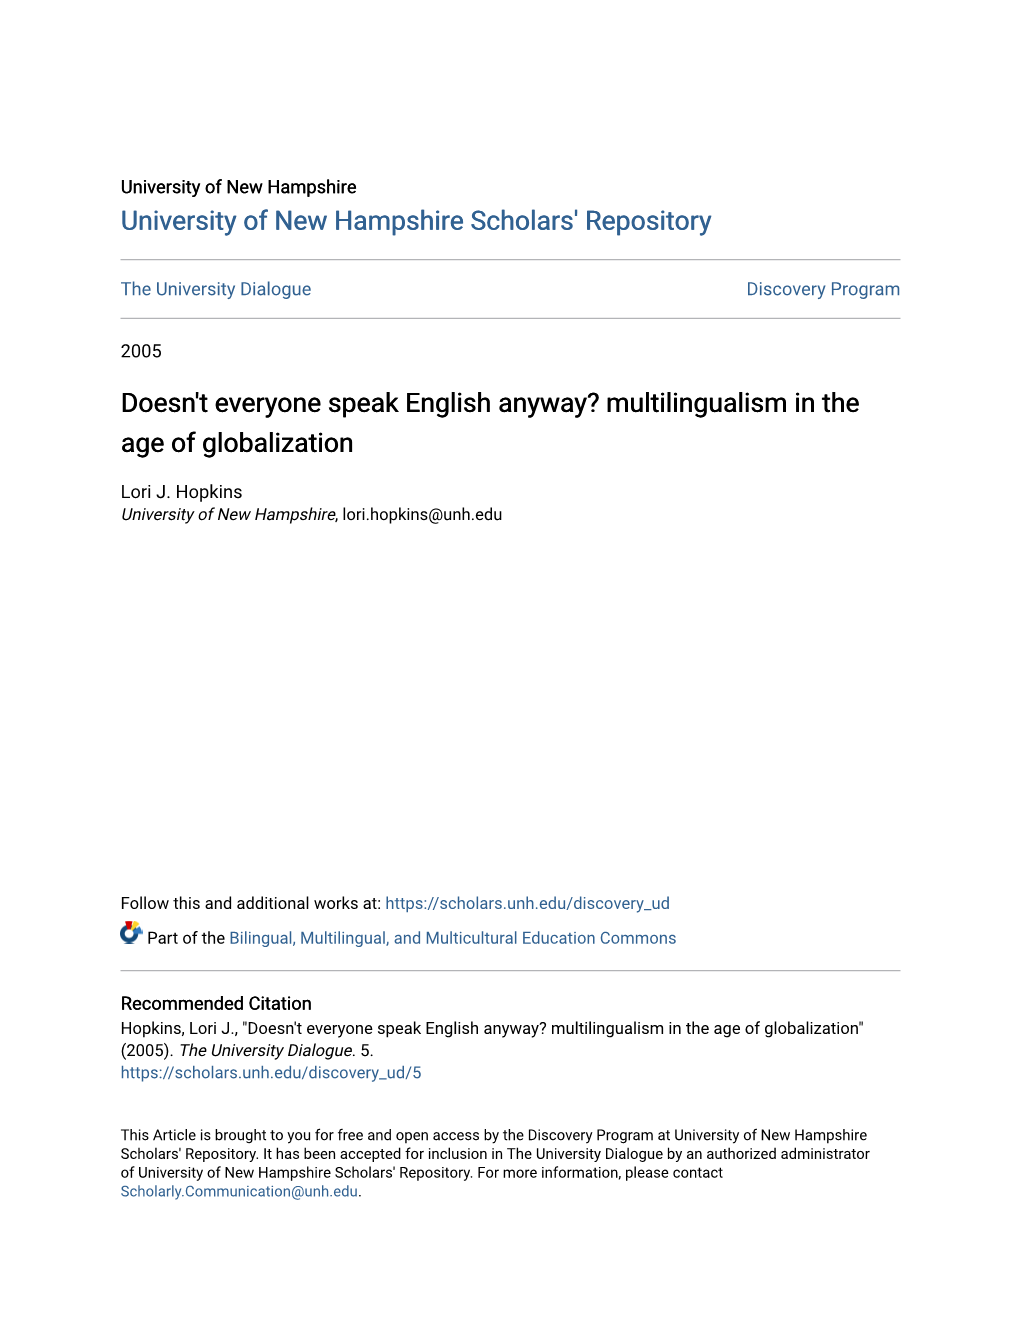 Multilingualism in the Age of Globalization